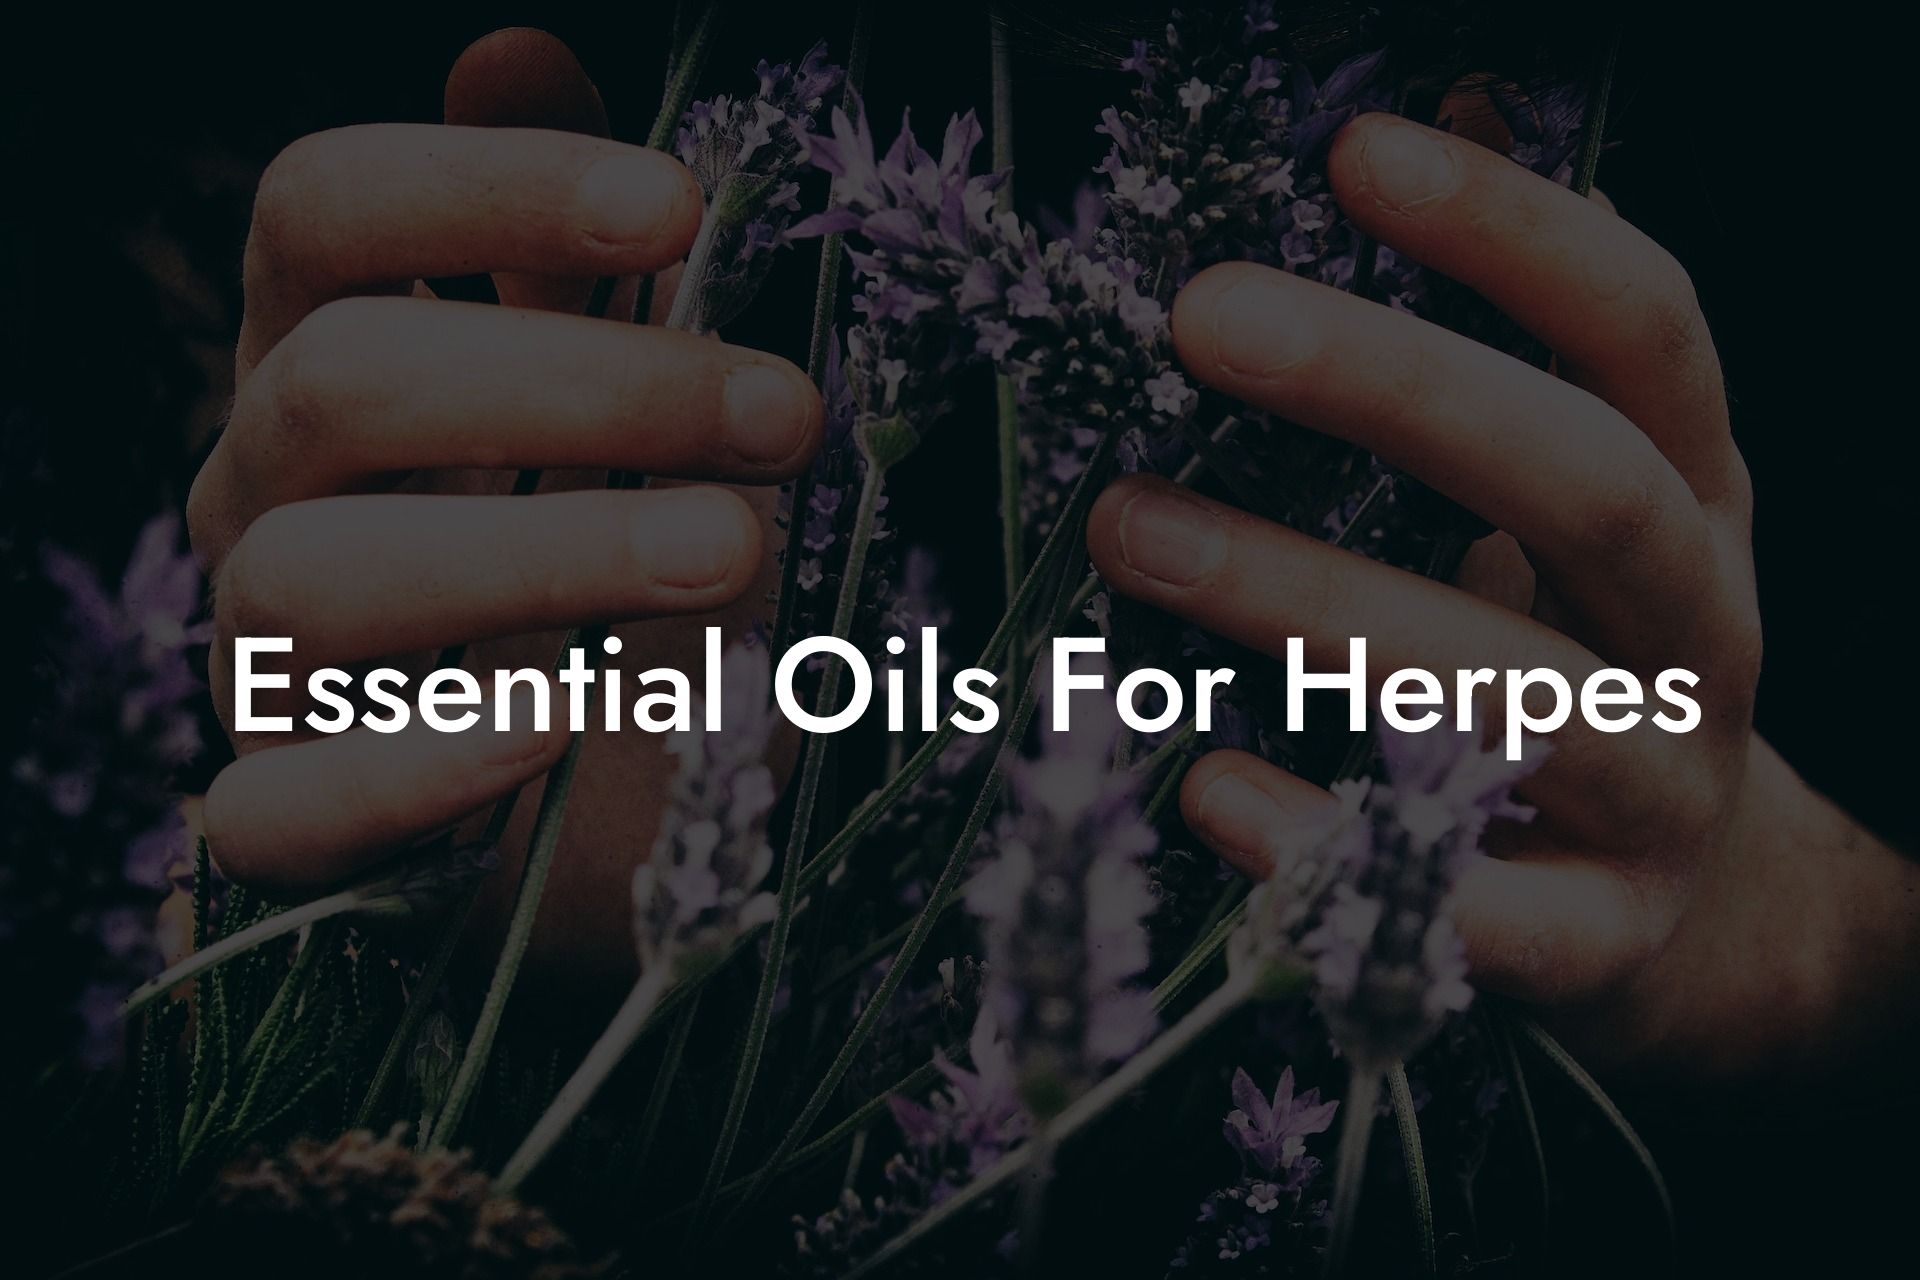 Essential Oils For Herpes